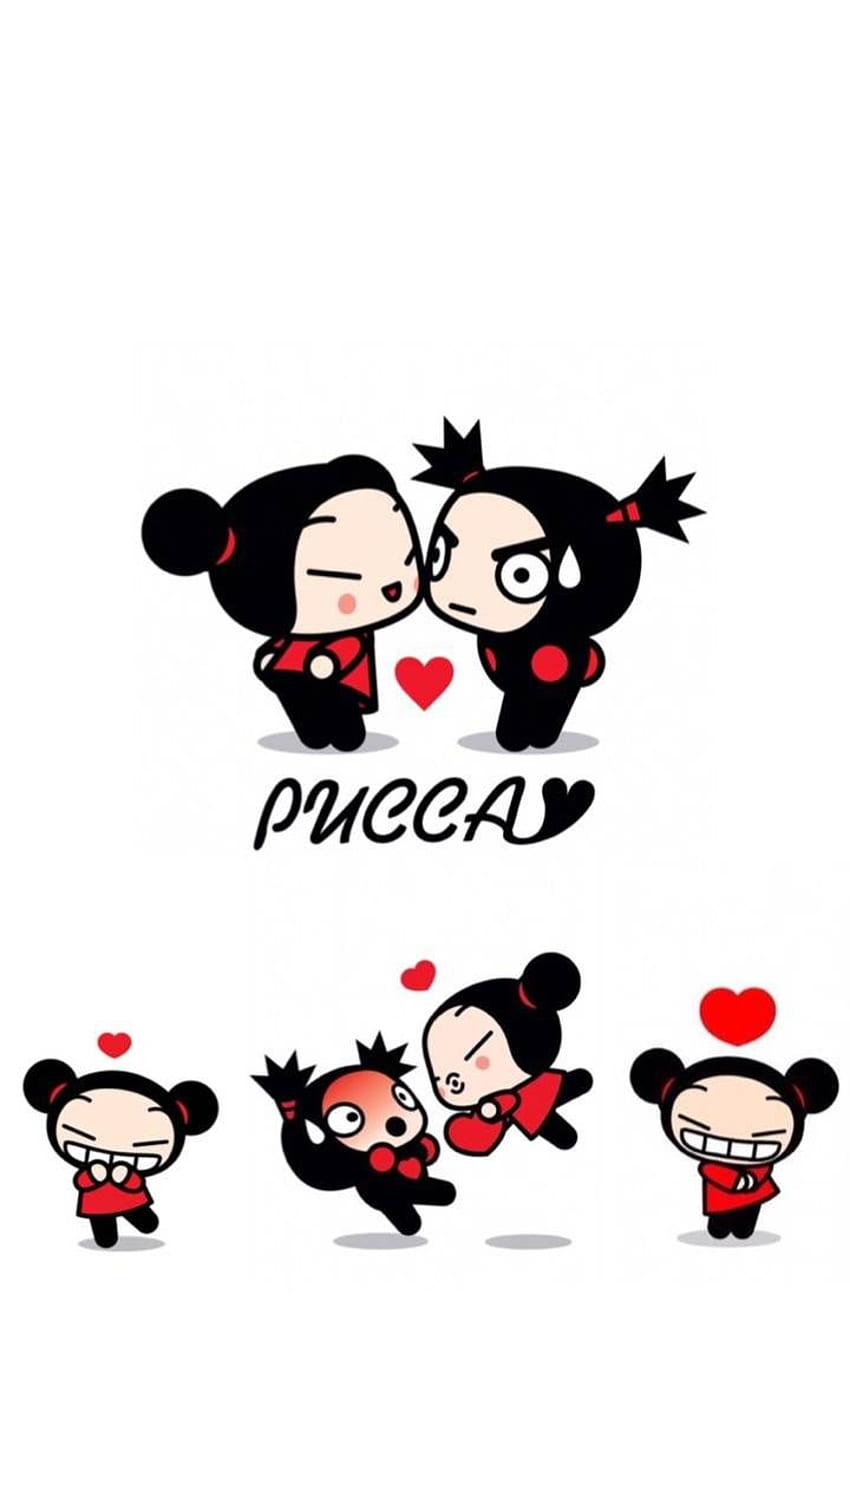 Download Pucca Wallpaper Art Free for Android - Pucca Wallpaper Art APK  Download - STEPrimo.com